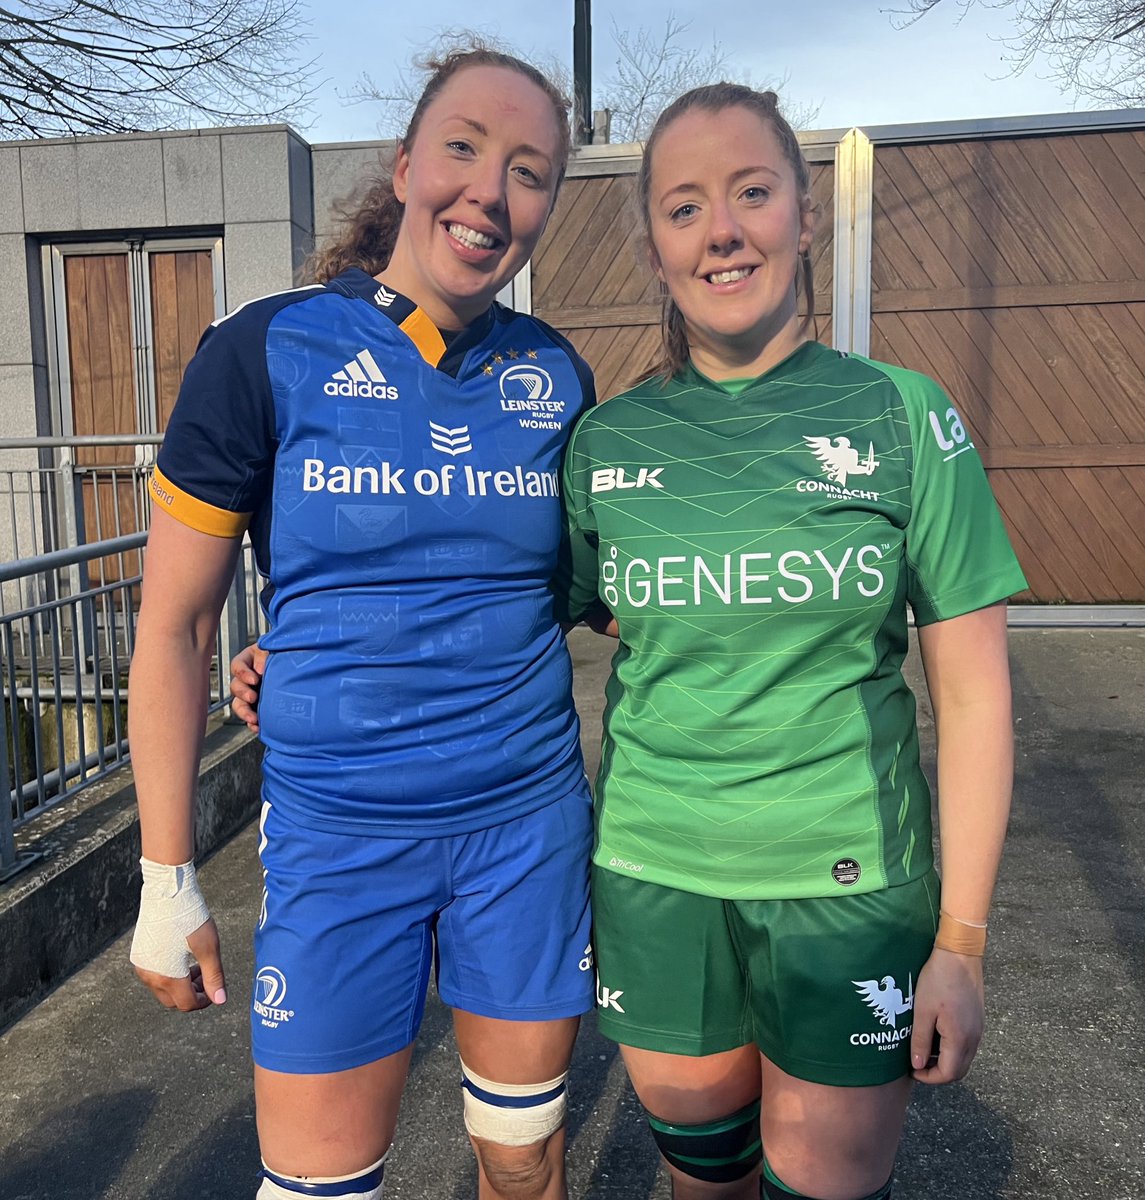 Rivals on the pitch, sisters off it! Great game of rugby in @EnergiaEnergy Park as Leinster beat Connacht 38-10. 🏉 Shout-out to sisters & @RFCRailwayUnion teammates Aoife & Sonia McDermott who lined-up against each other today. Nothing like some friendly sibling rivalry.😅